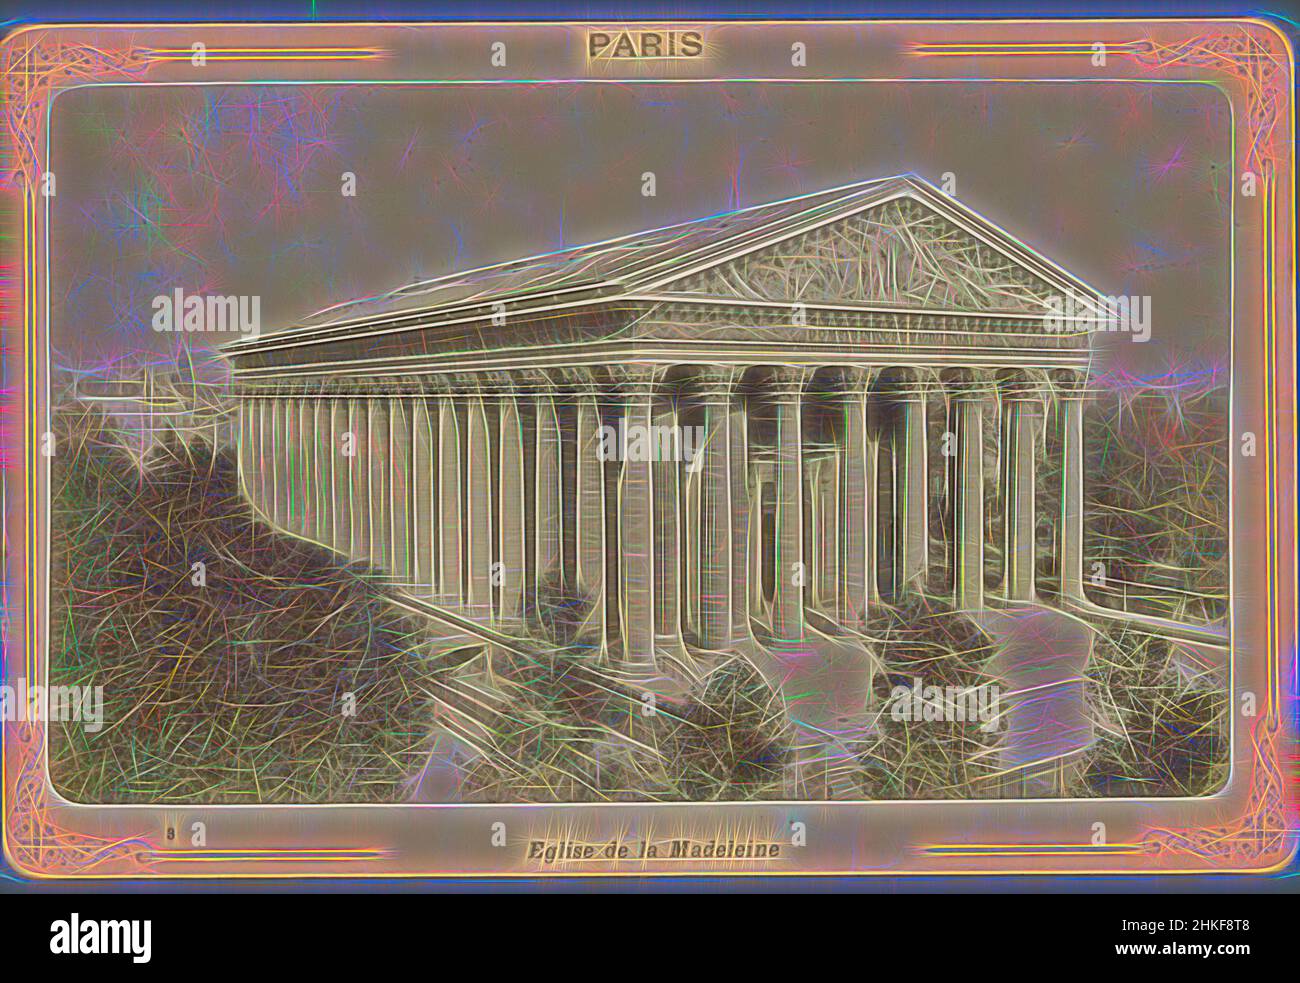 Inspired by View of the Madeleine in Paris, Eglise de la Madeleine, Paris, Étienne Neurdein, Paris, 1870 - 1900, albumen print, height 107 mm × width 164 mm, Reimagined by Artotop. Classic art reinvented with a modern twist. Design of warm cheerful glowing of brightness and light ray radiance. Photography inspired by surrealism and futurism, embracing dynamic energy of modern technology, movement, speed and revolutionize culture Stock Photo